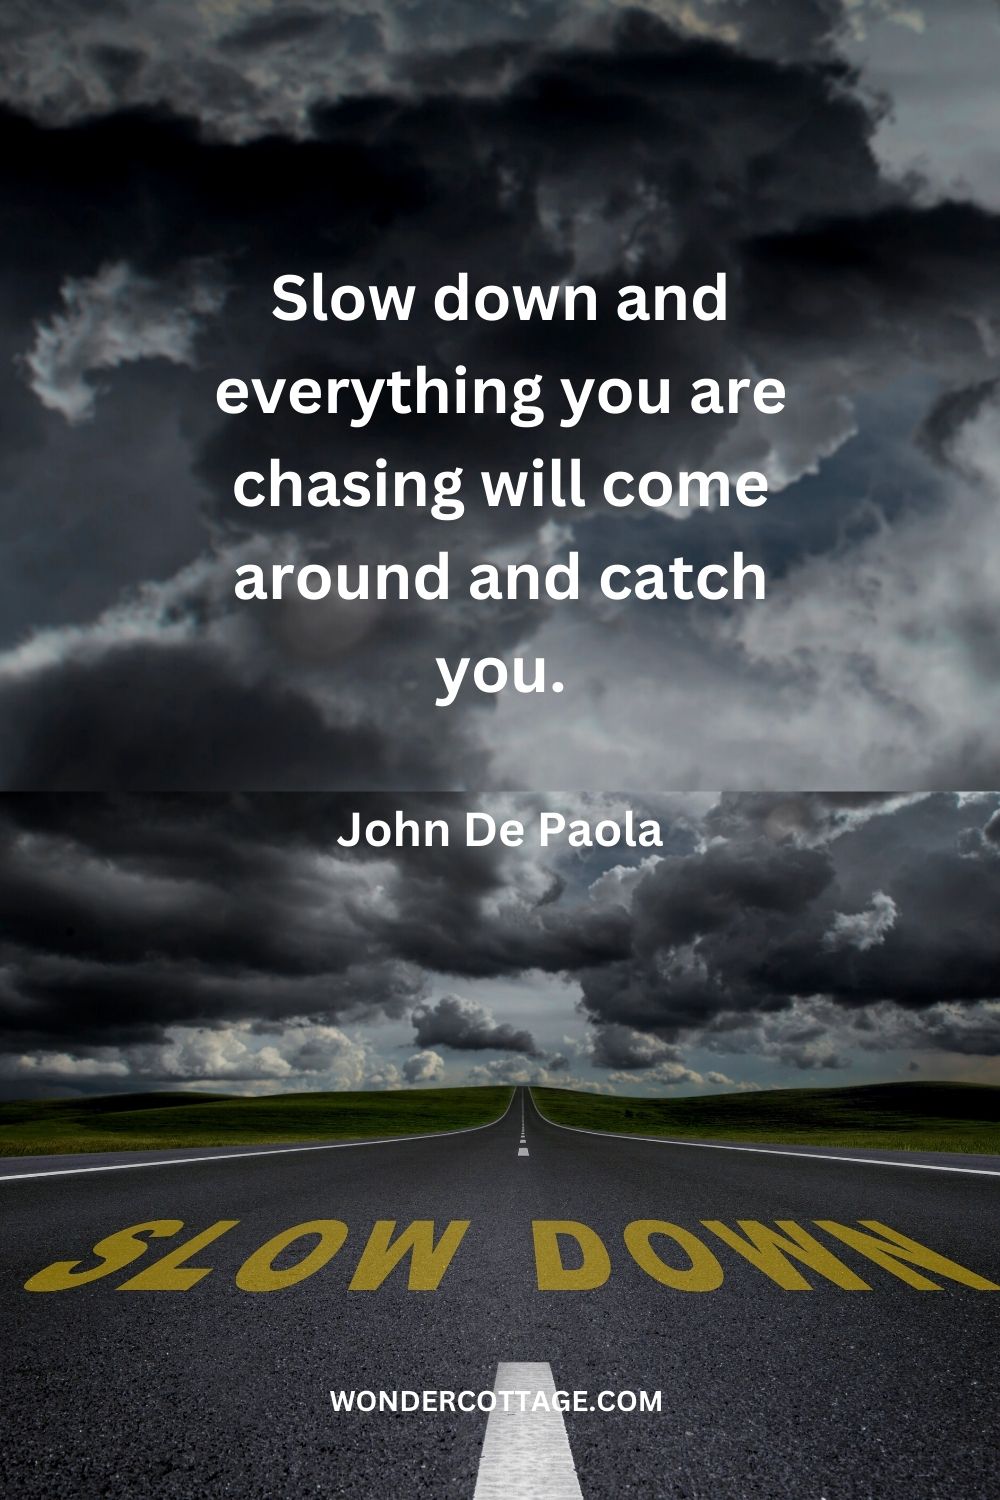 Slow down and everything you are chasing will come around and catch you. John De Paola